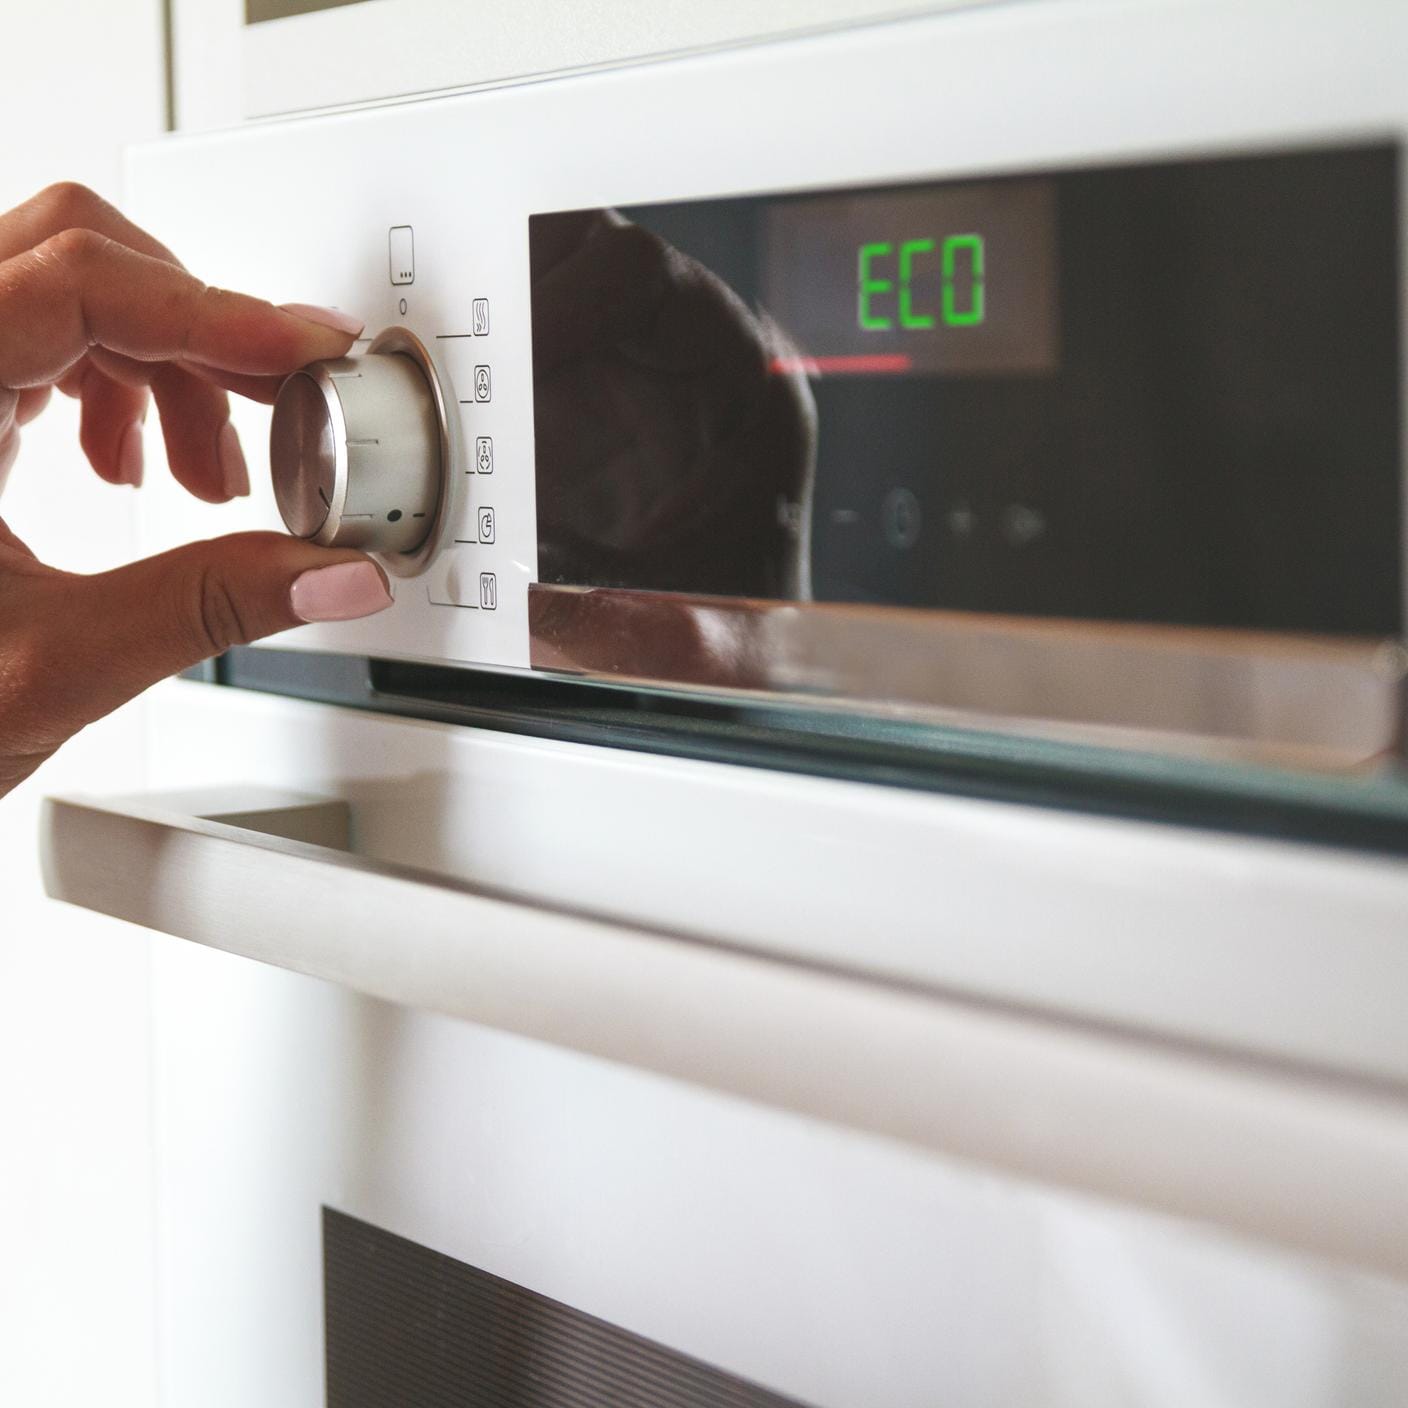 Person selecting eco mode operation of an electric oven